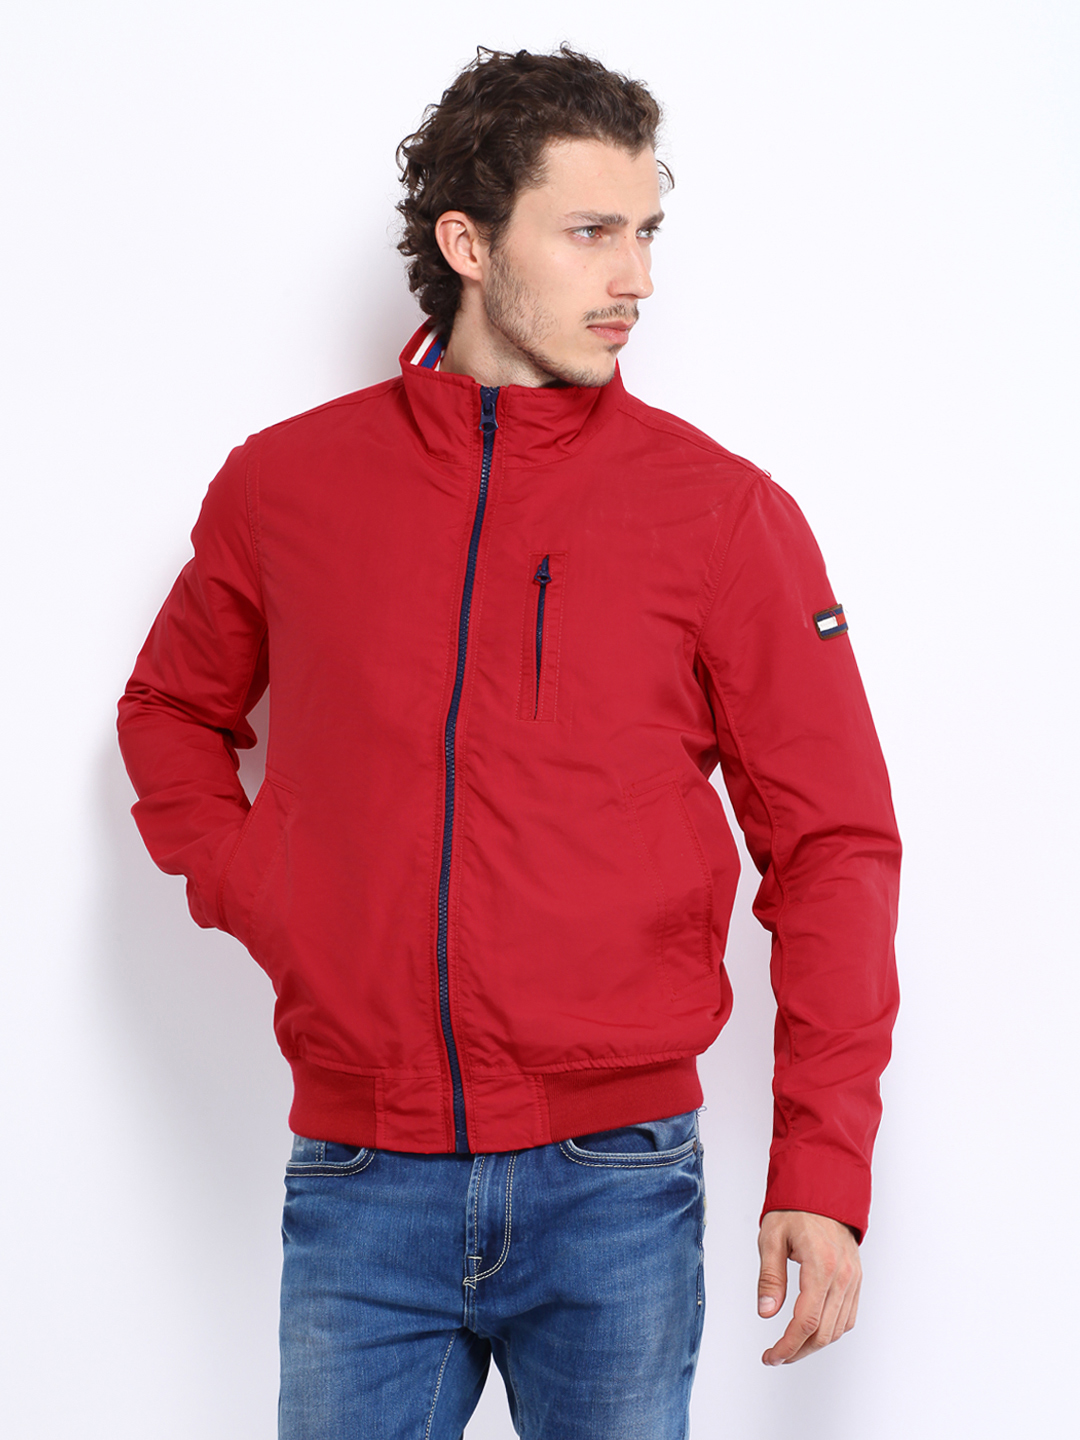 tommy jackets india